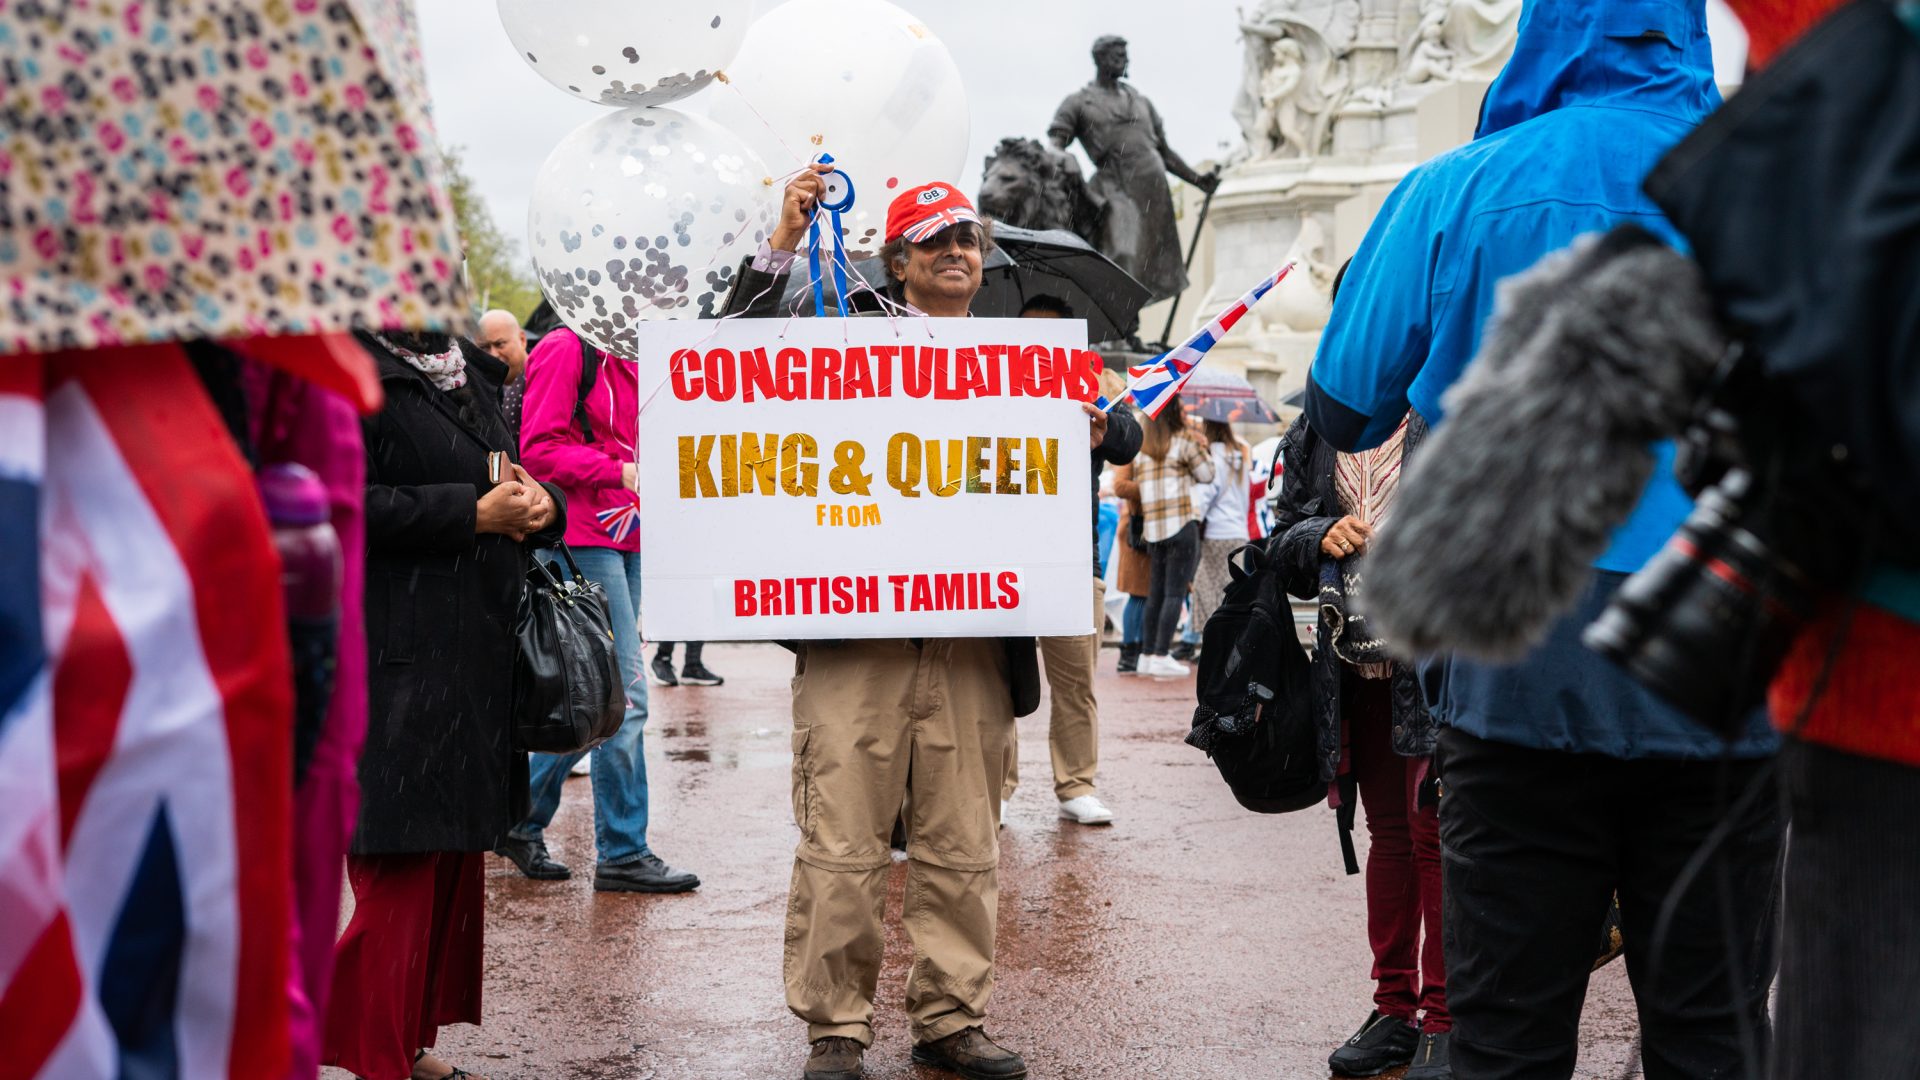 A man holds up a sign saying 'Congratulations King & Queen from British Tamils'.